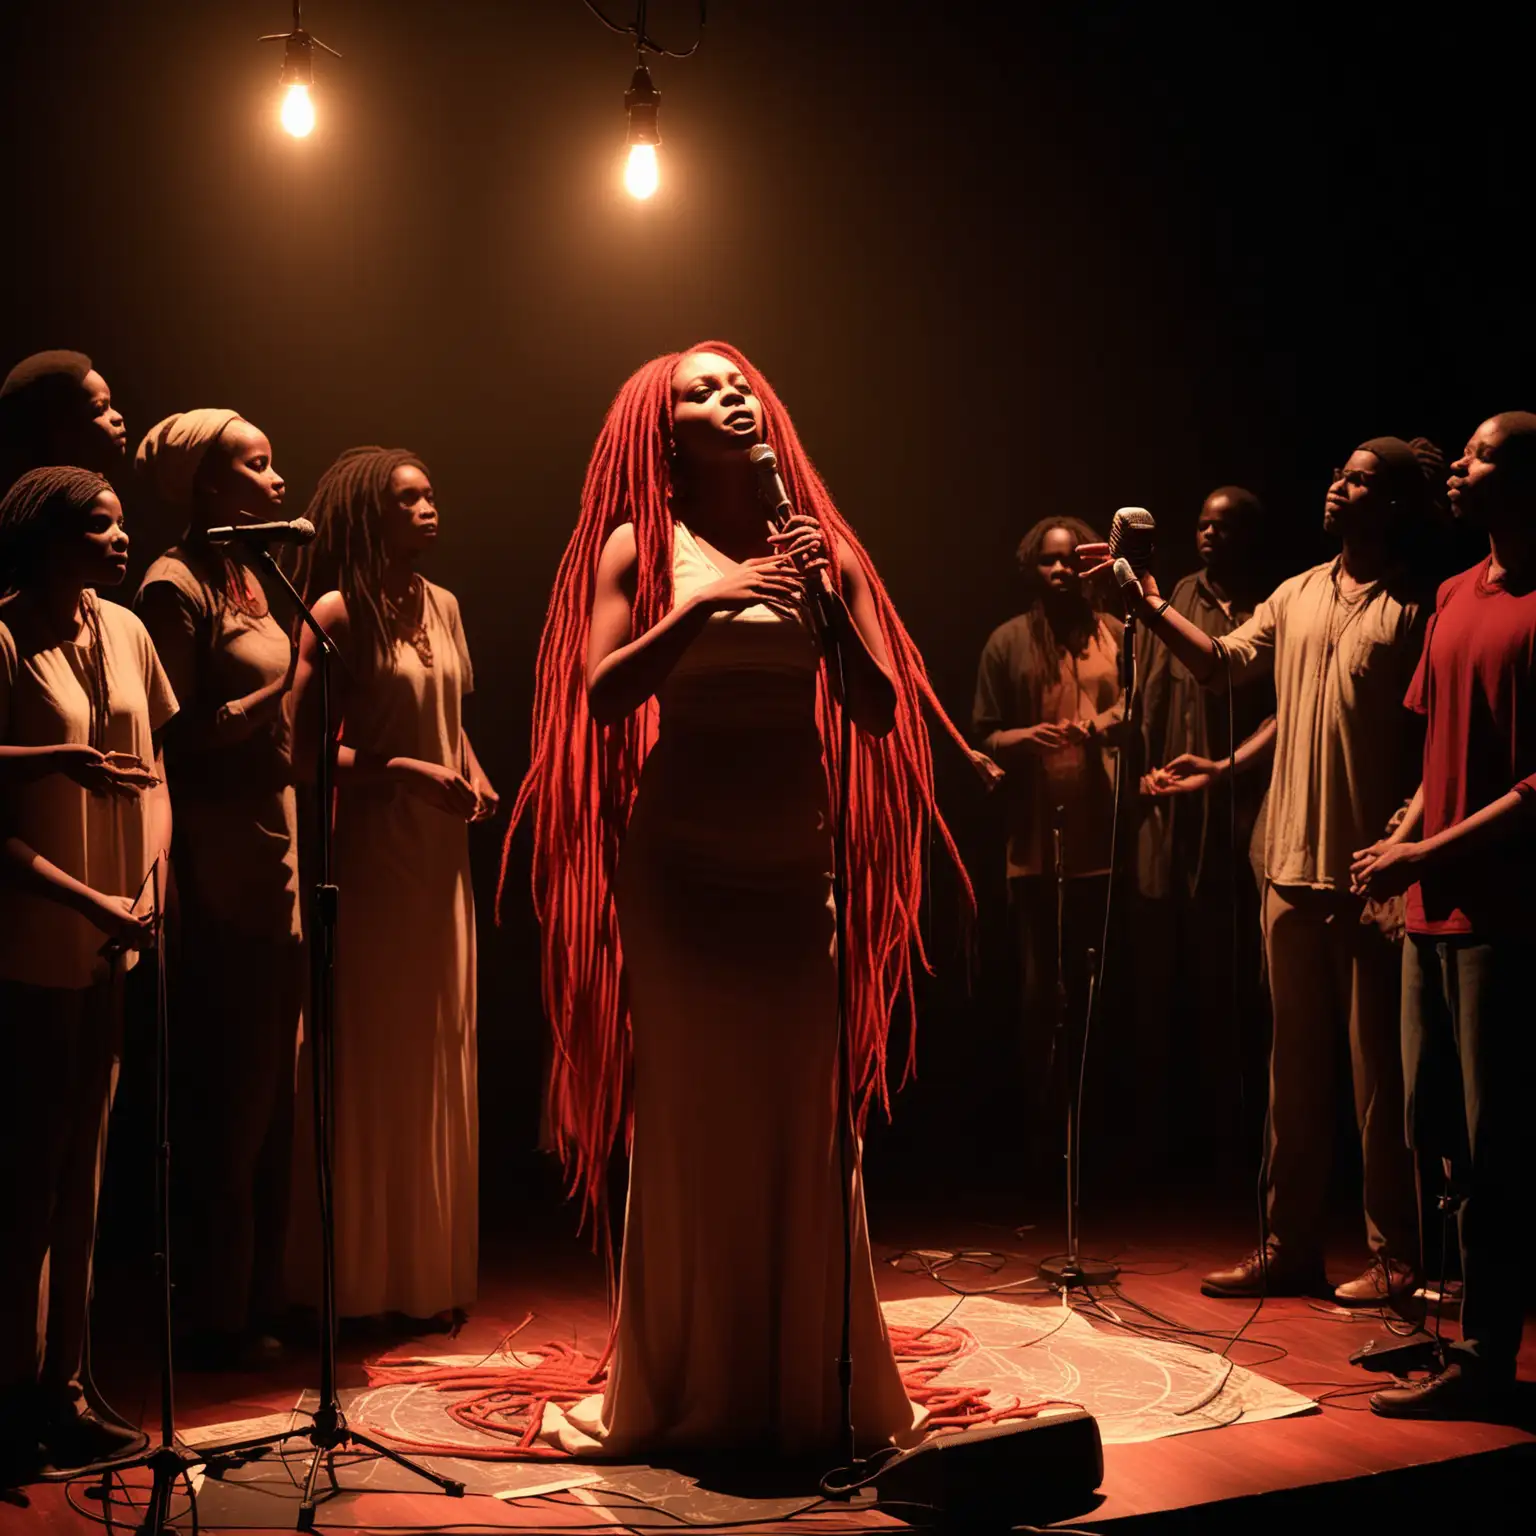 In a hushed reverence, flickering candlelight paints the walls of a dark spoken word club. The air thrums with anticipation, a low hum of energy vibrating from a diverse crowd of African Americans. All eyes are fixed on the stage, bathed in a single spotlight that illuminates a woman poet. Her long red dreadlocks cascade down her back as she weaves her magic, captivating the audience with her words. Behind her, a five-piece band stands poised, ready to interweave their melody with the rising power of her poetry.